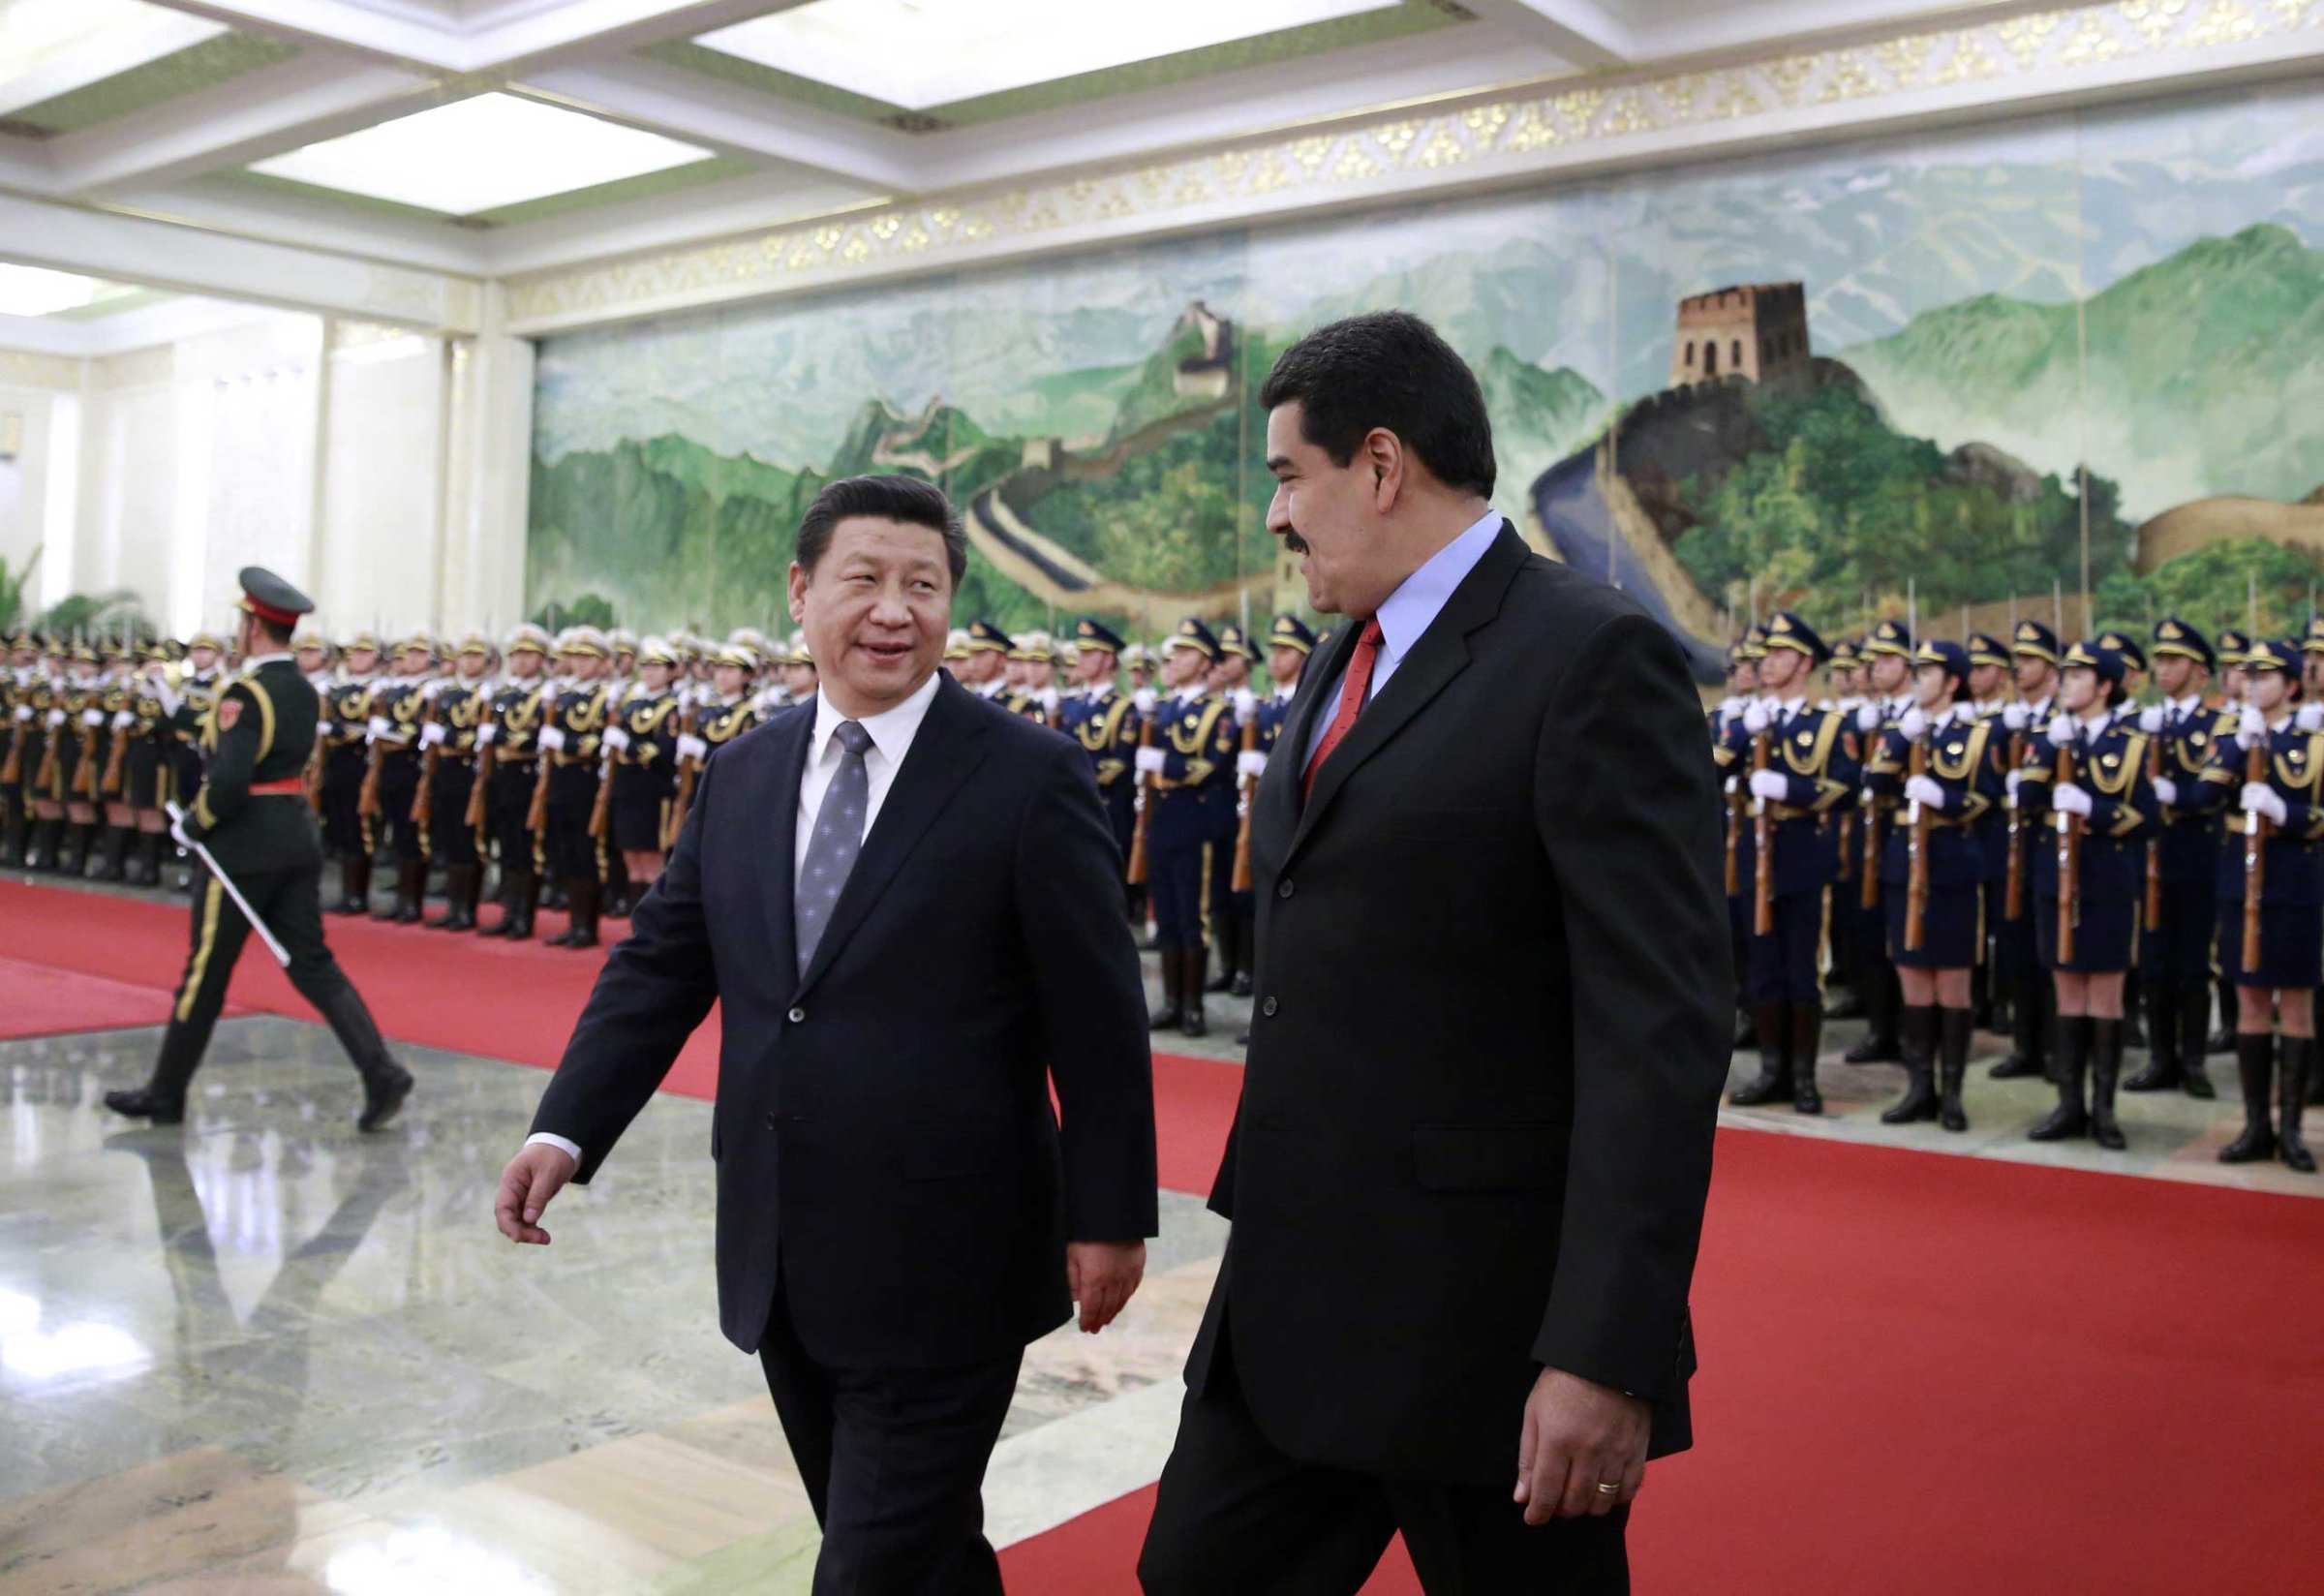 Venezuela's President Nicolas Maduro and Chinese President Xi Jinping chat after reviewing an honor guard during a welcome ceremony at the Great Hall of the People in Beijing on Jan. 7, 2015.